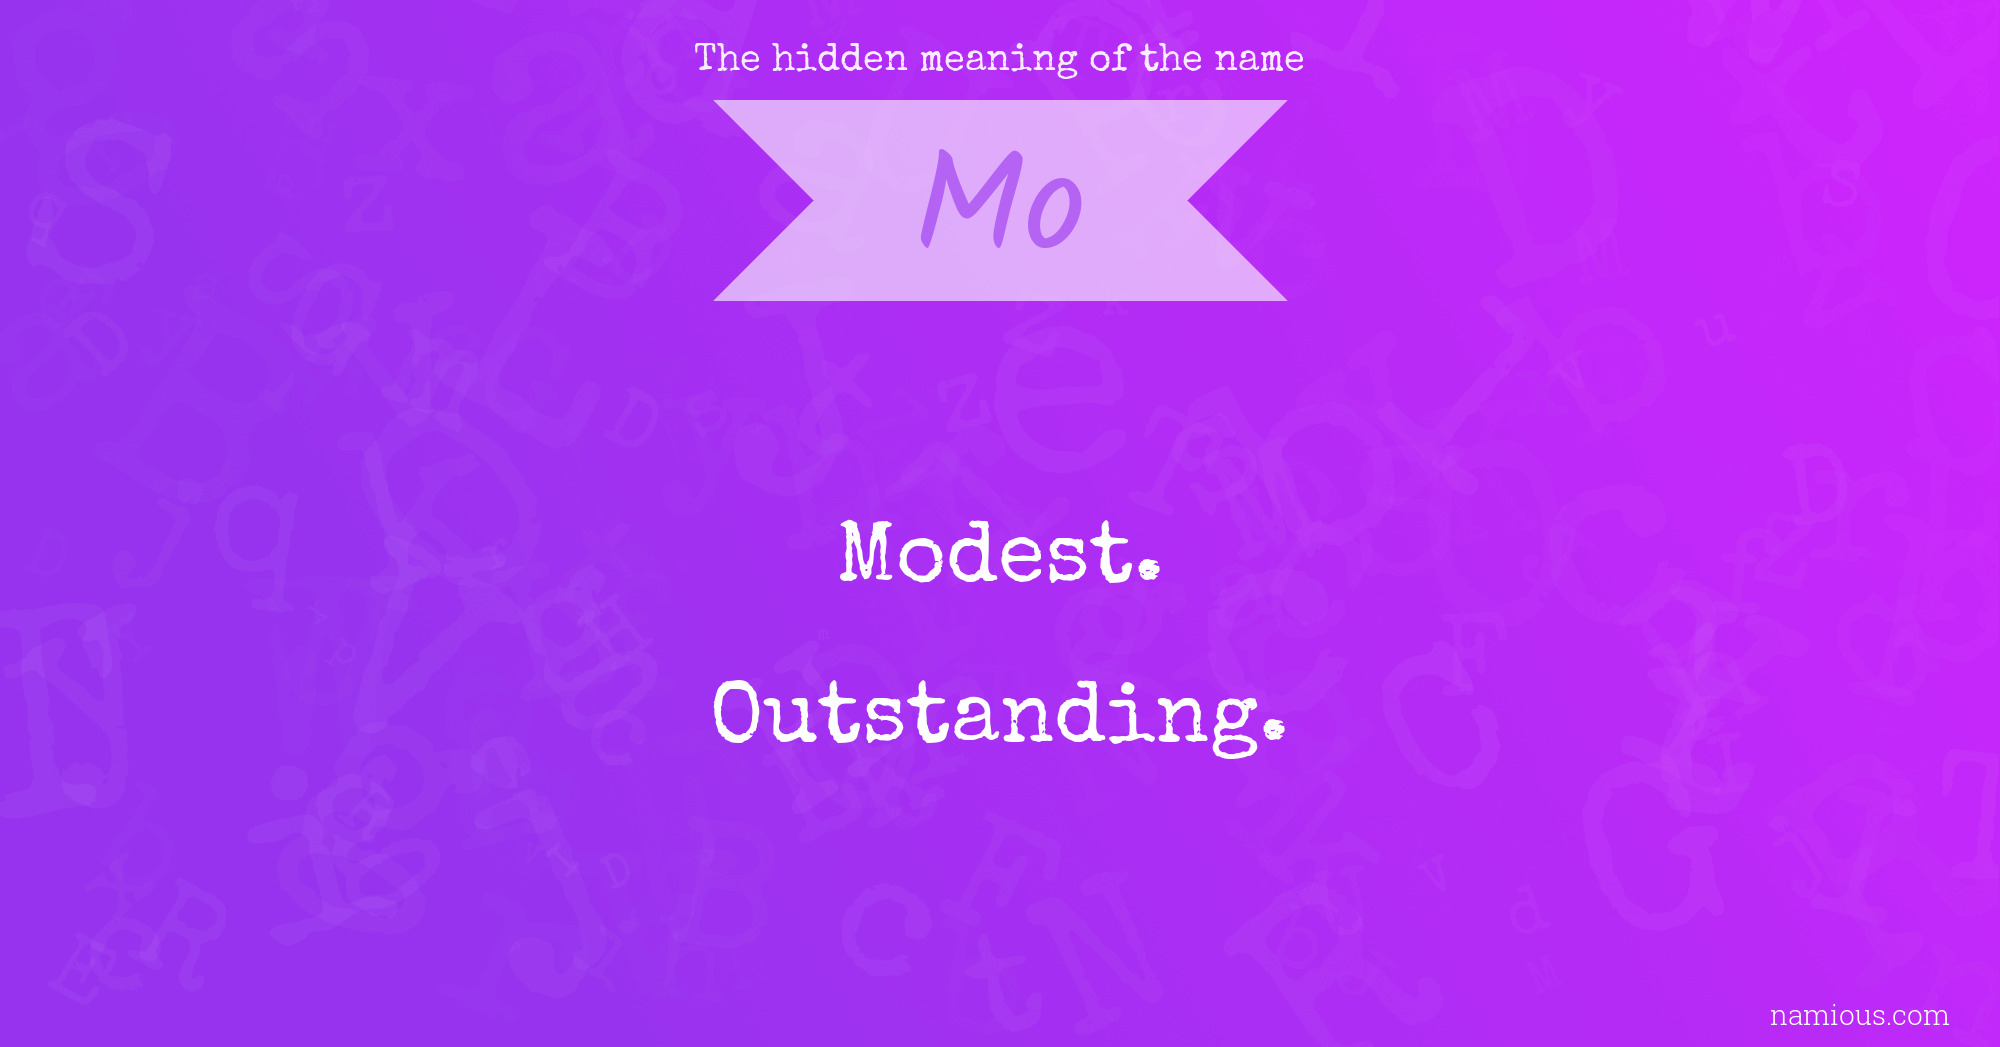 The hidden meaning of the name Mo